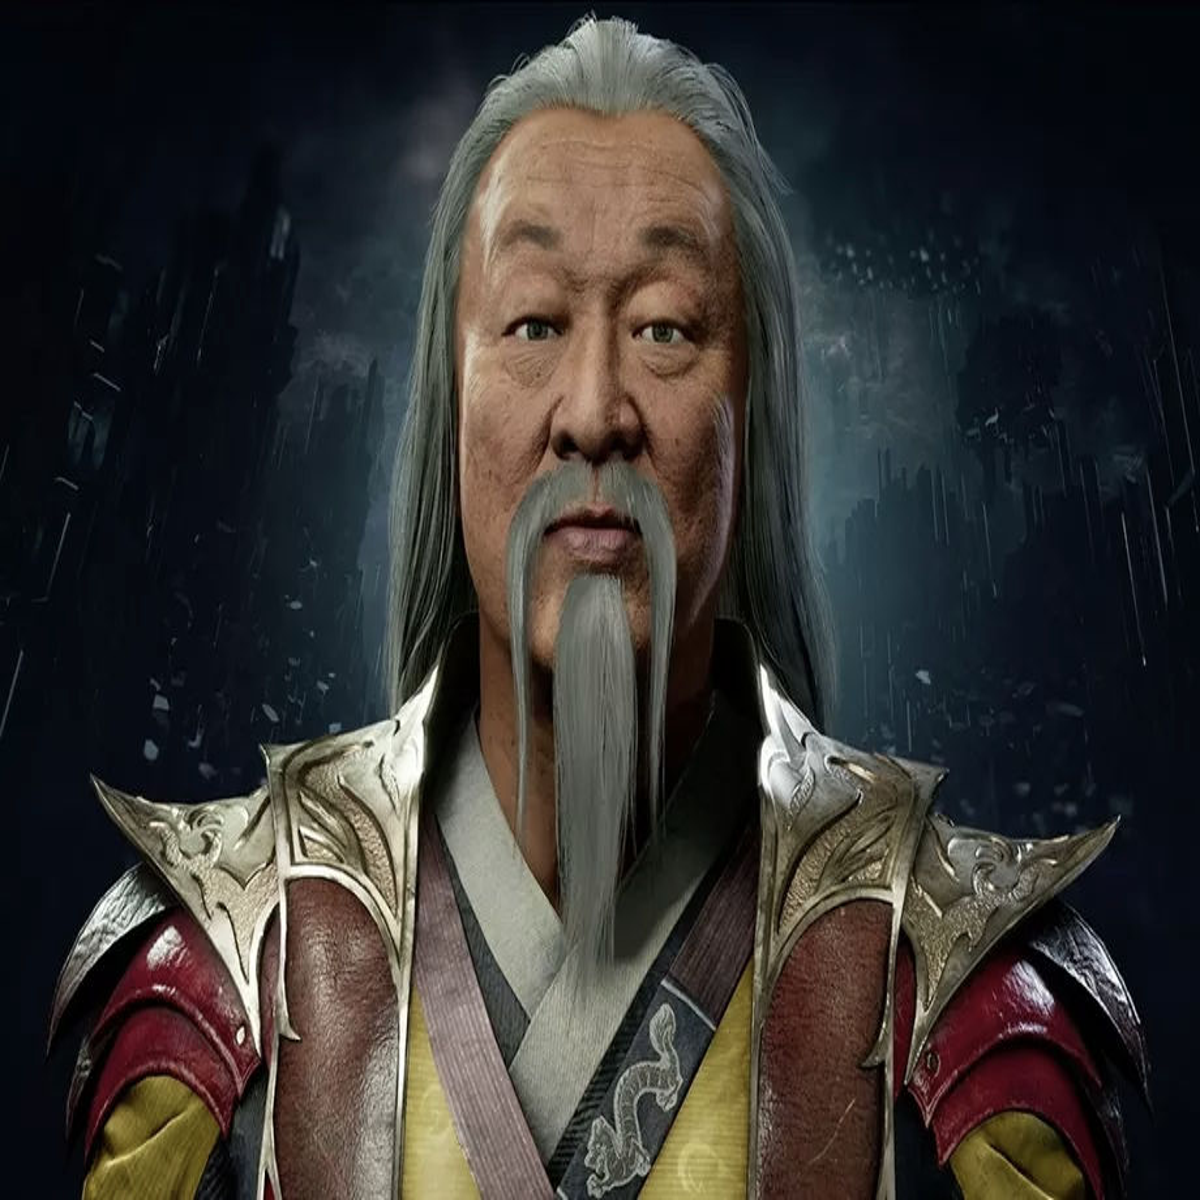 Shang Tsung, Nightwolf and a handful of other fighters are on their way to  Mortal Kombat 11